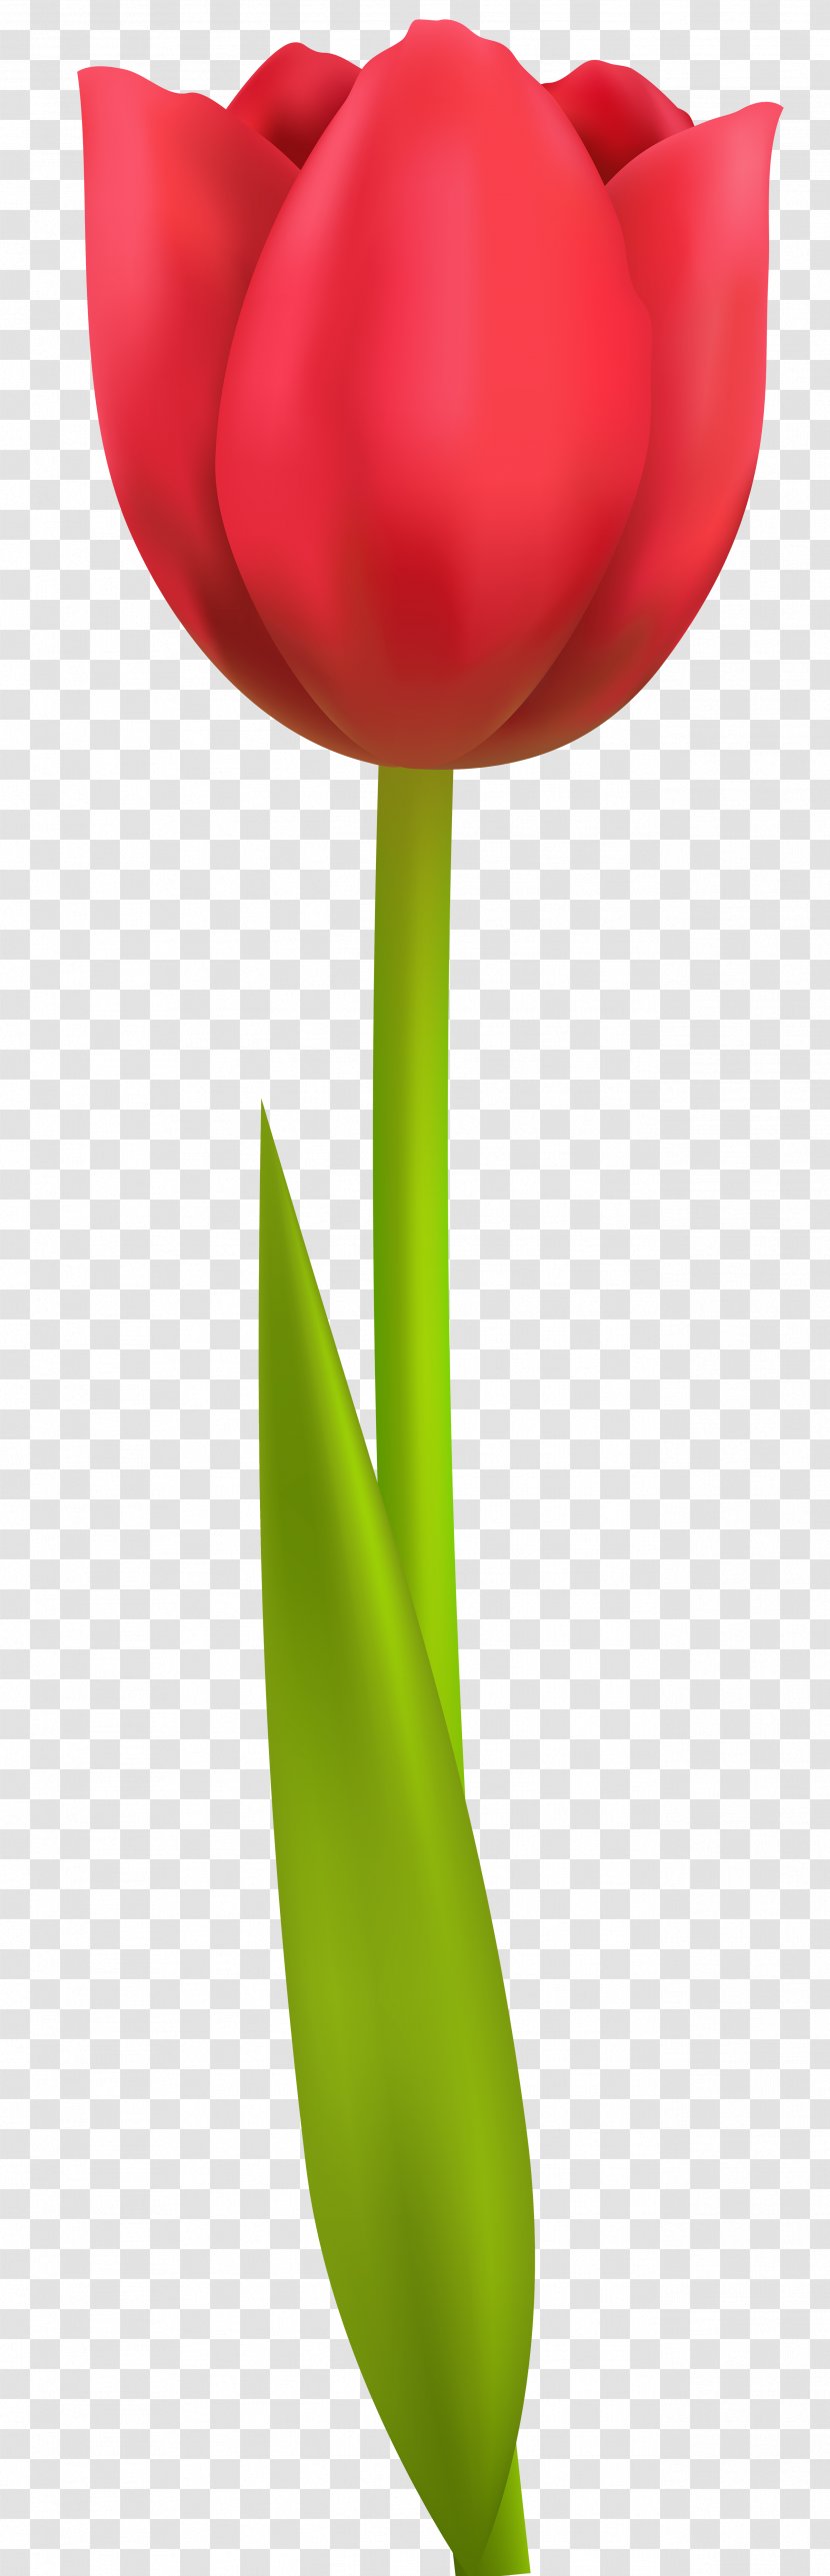 The Tulip: Story Of A Flower That Has Made Men Mad Computer File - Tulip Transparent Clip Art Image Transparent PNG